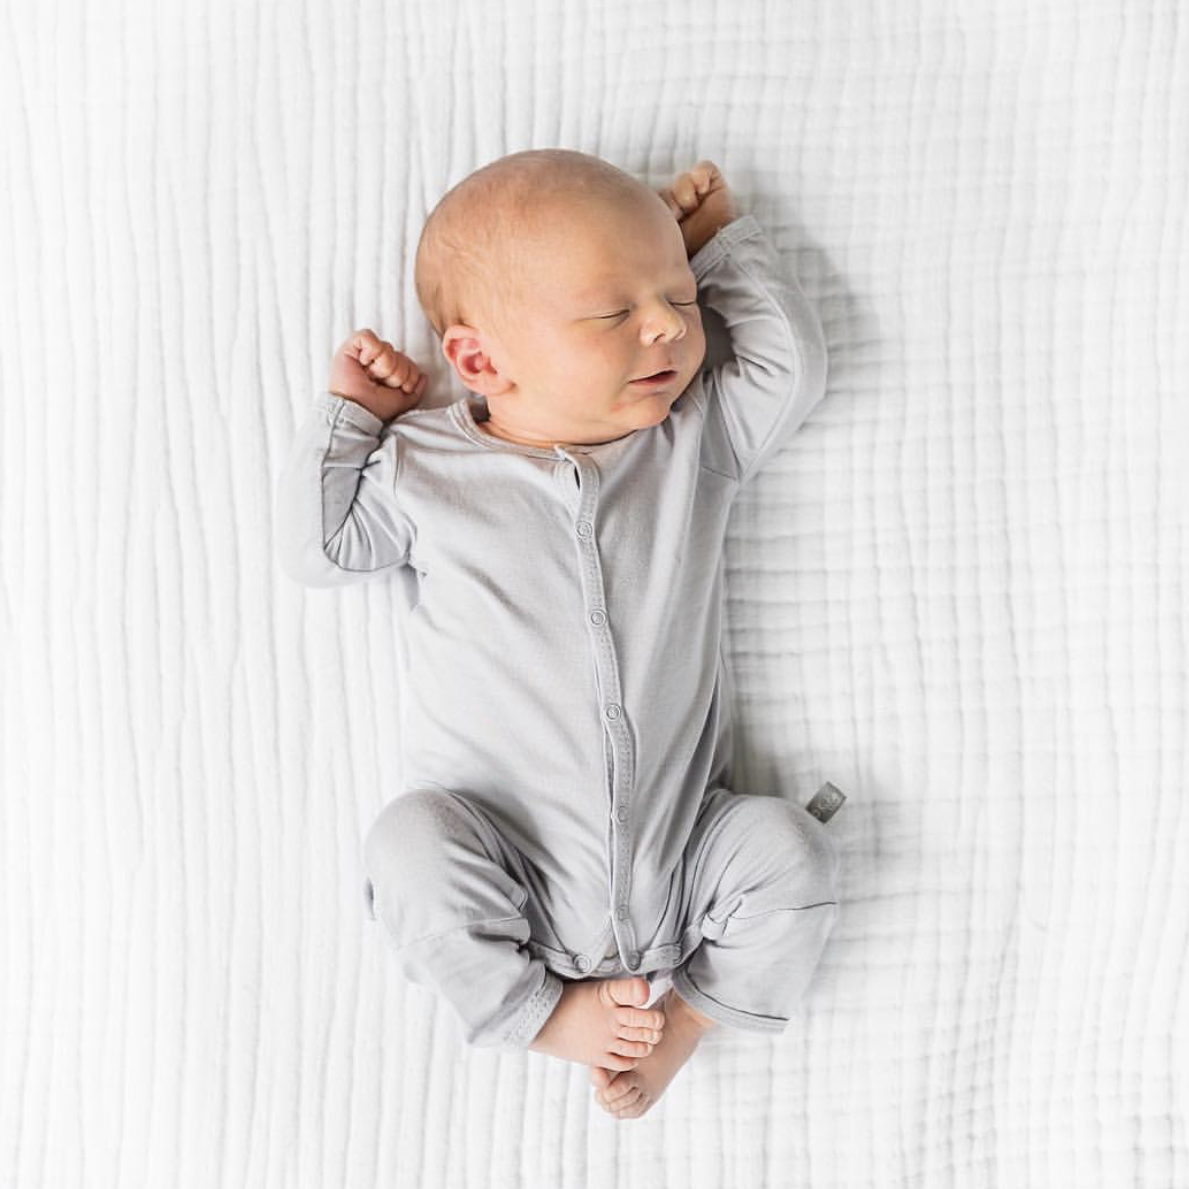 How White Noise Can Help Your Baby Sleep Better